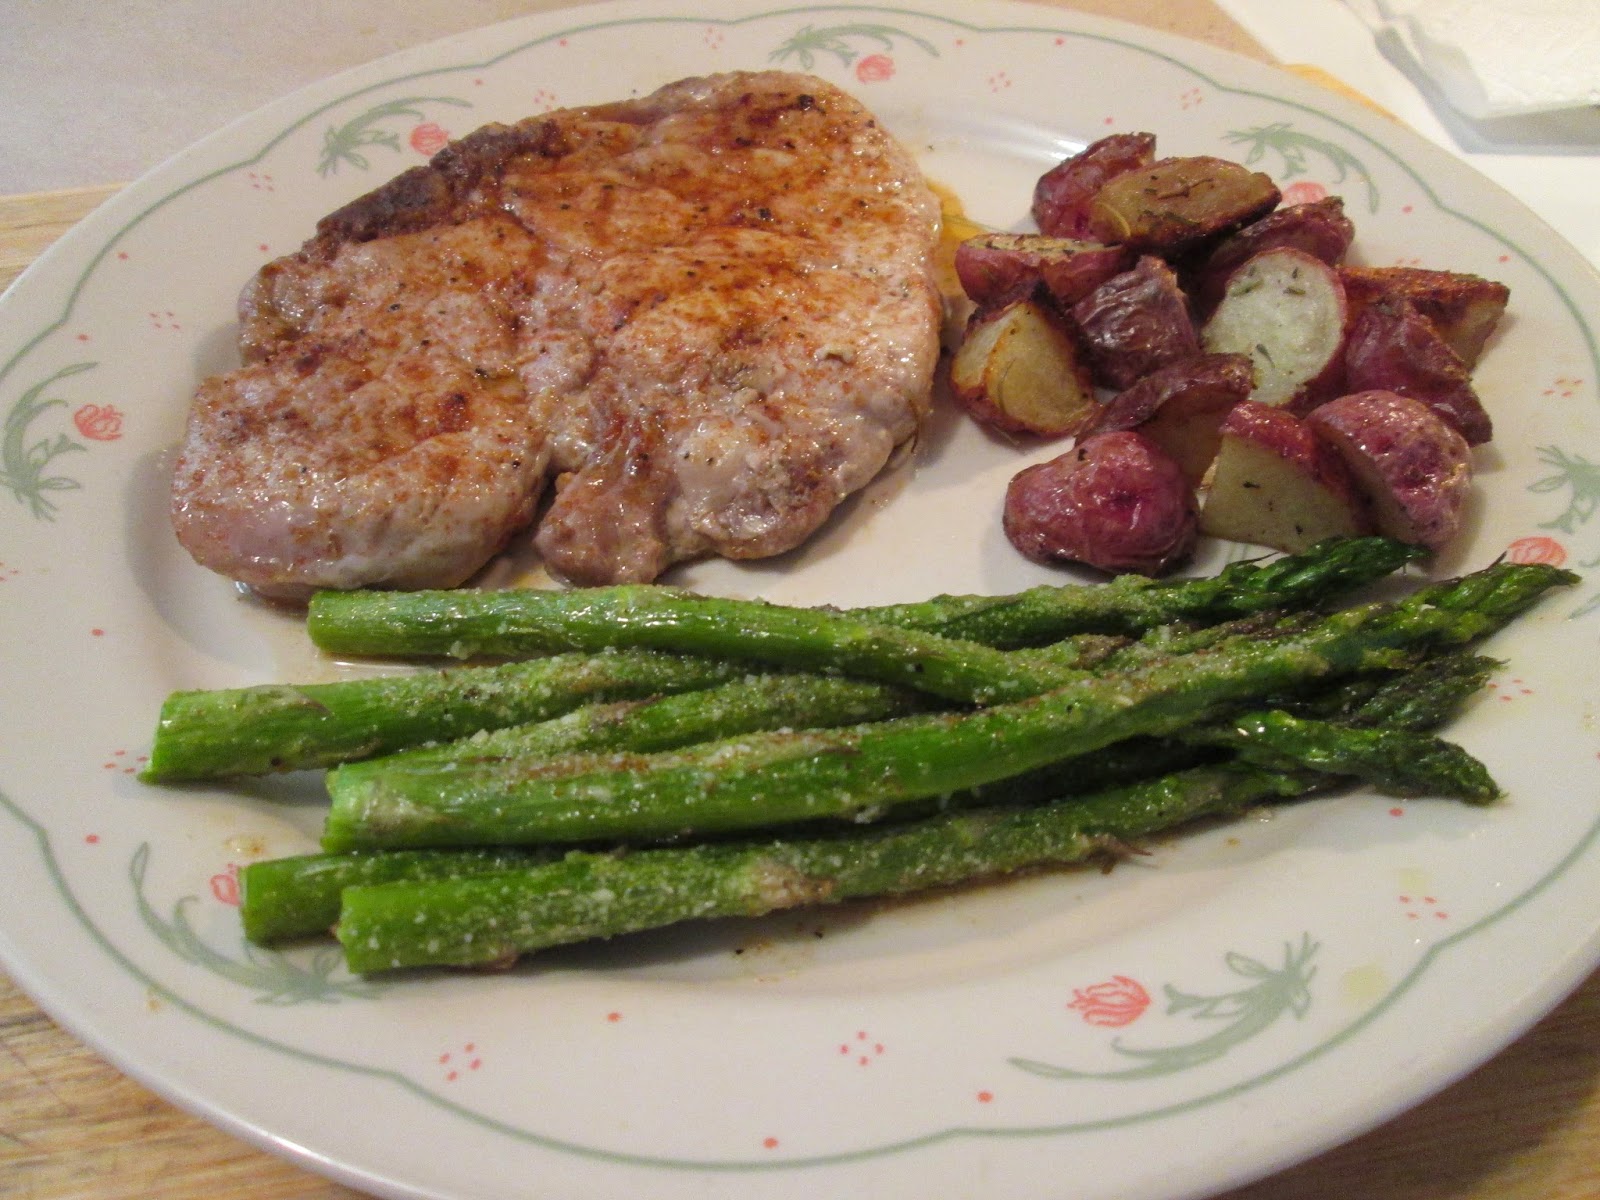 paprika pork chops w/ fresh roasted asparagus and roasted red potatoes